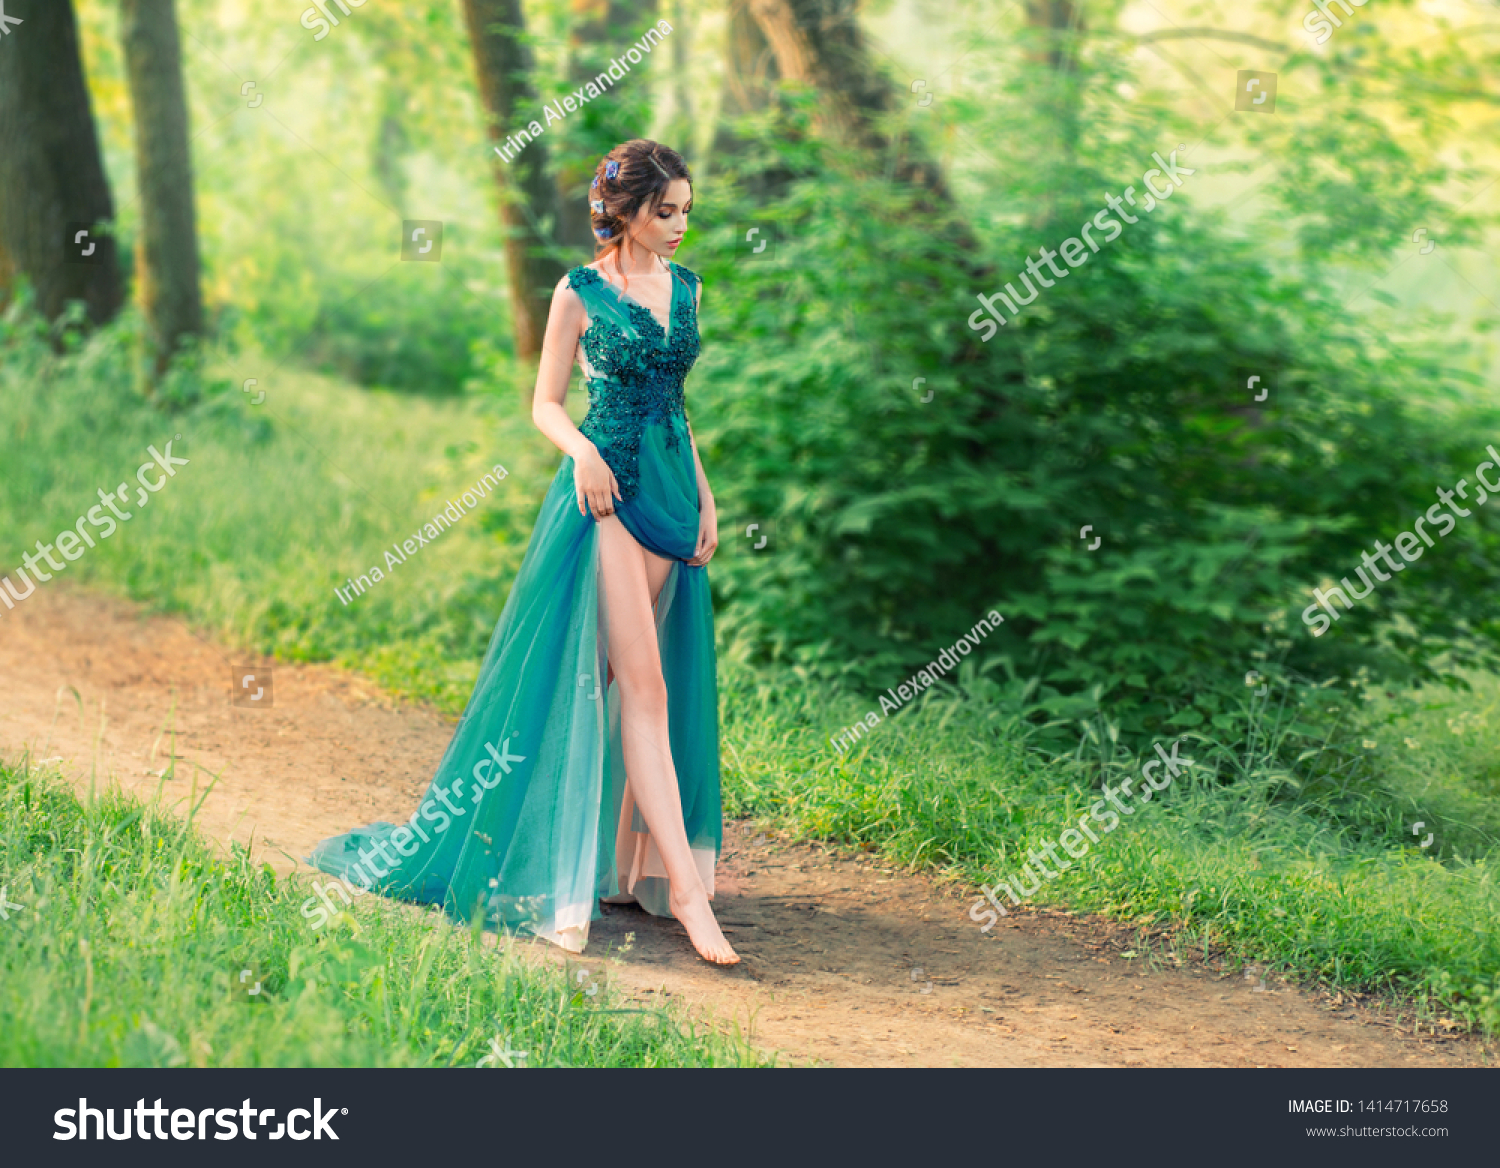 charming gentle angel descended from sky and cautiously walks along forest path. cute princess in long elegant elegant expensive dress with dark braided hair decorated with flowers, sexy bare legs #1414717658